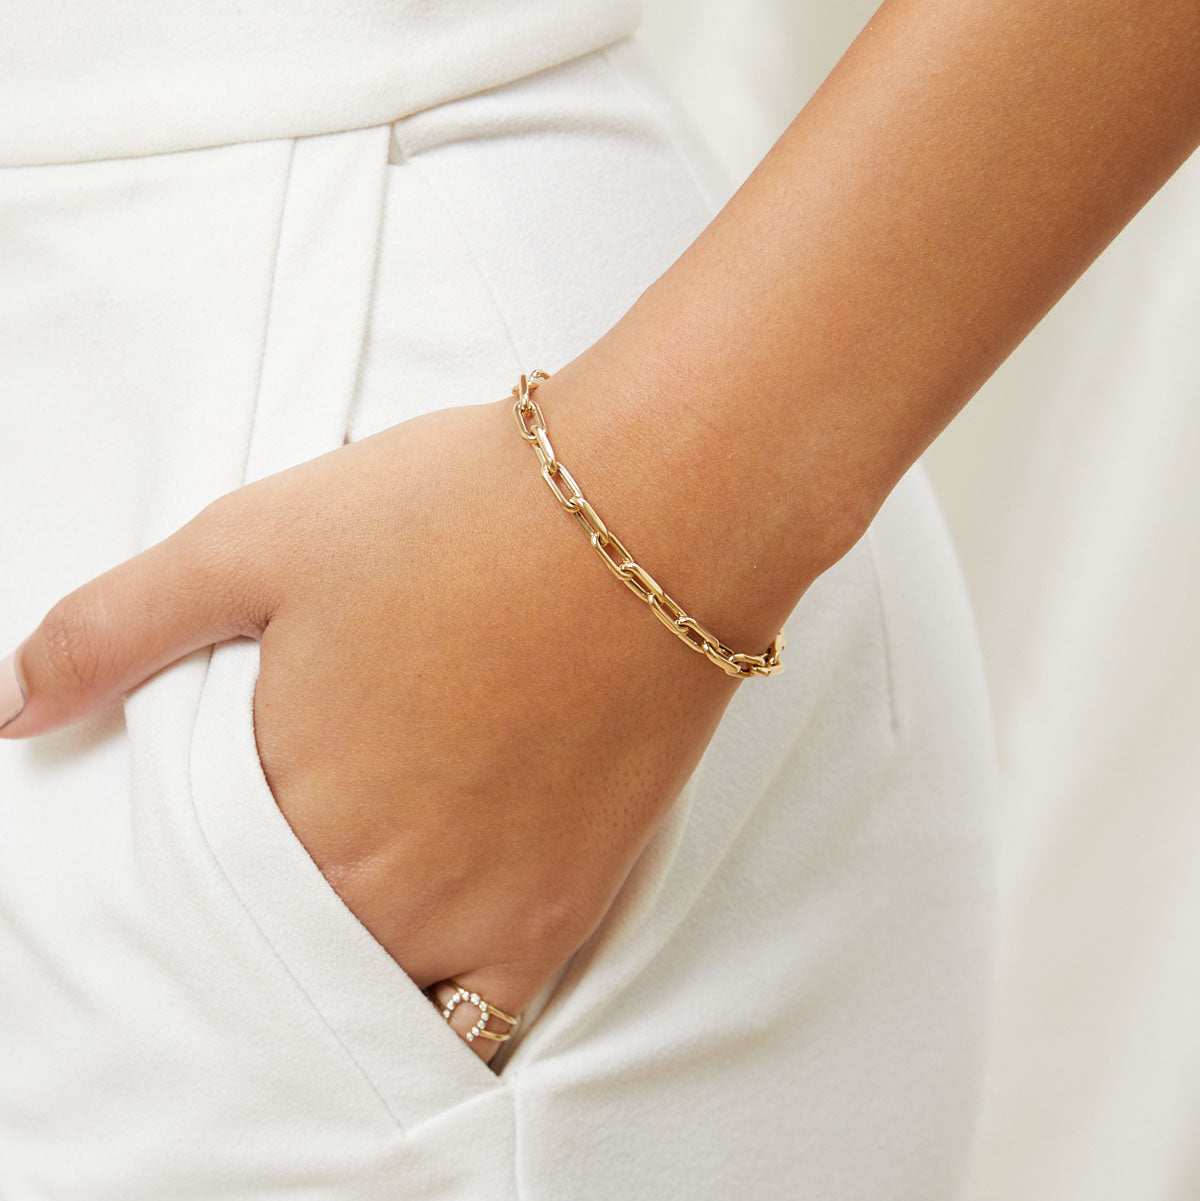 14K Grand Paper Clip Chain Bracelet 14K Yellow Gold / 6.5 Inches by Baby Gold - Shop Custom Gold Jewelry